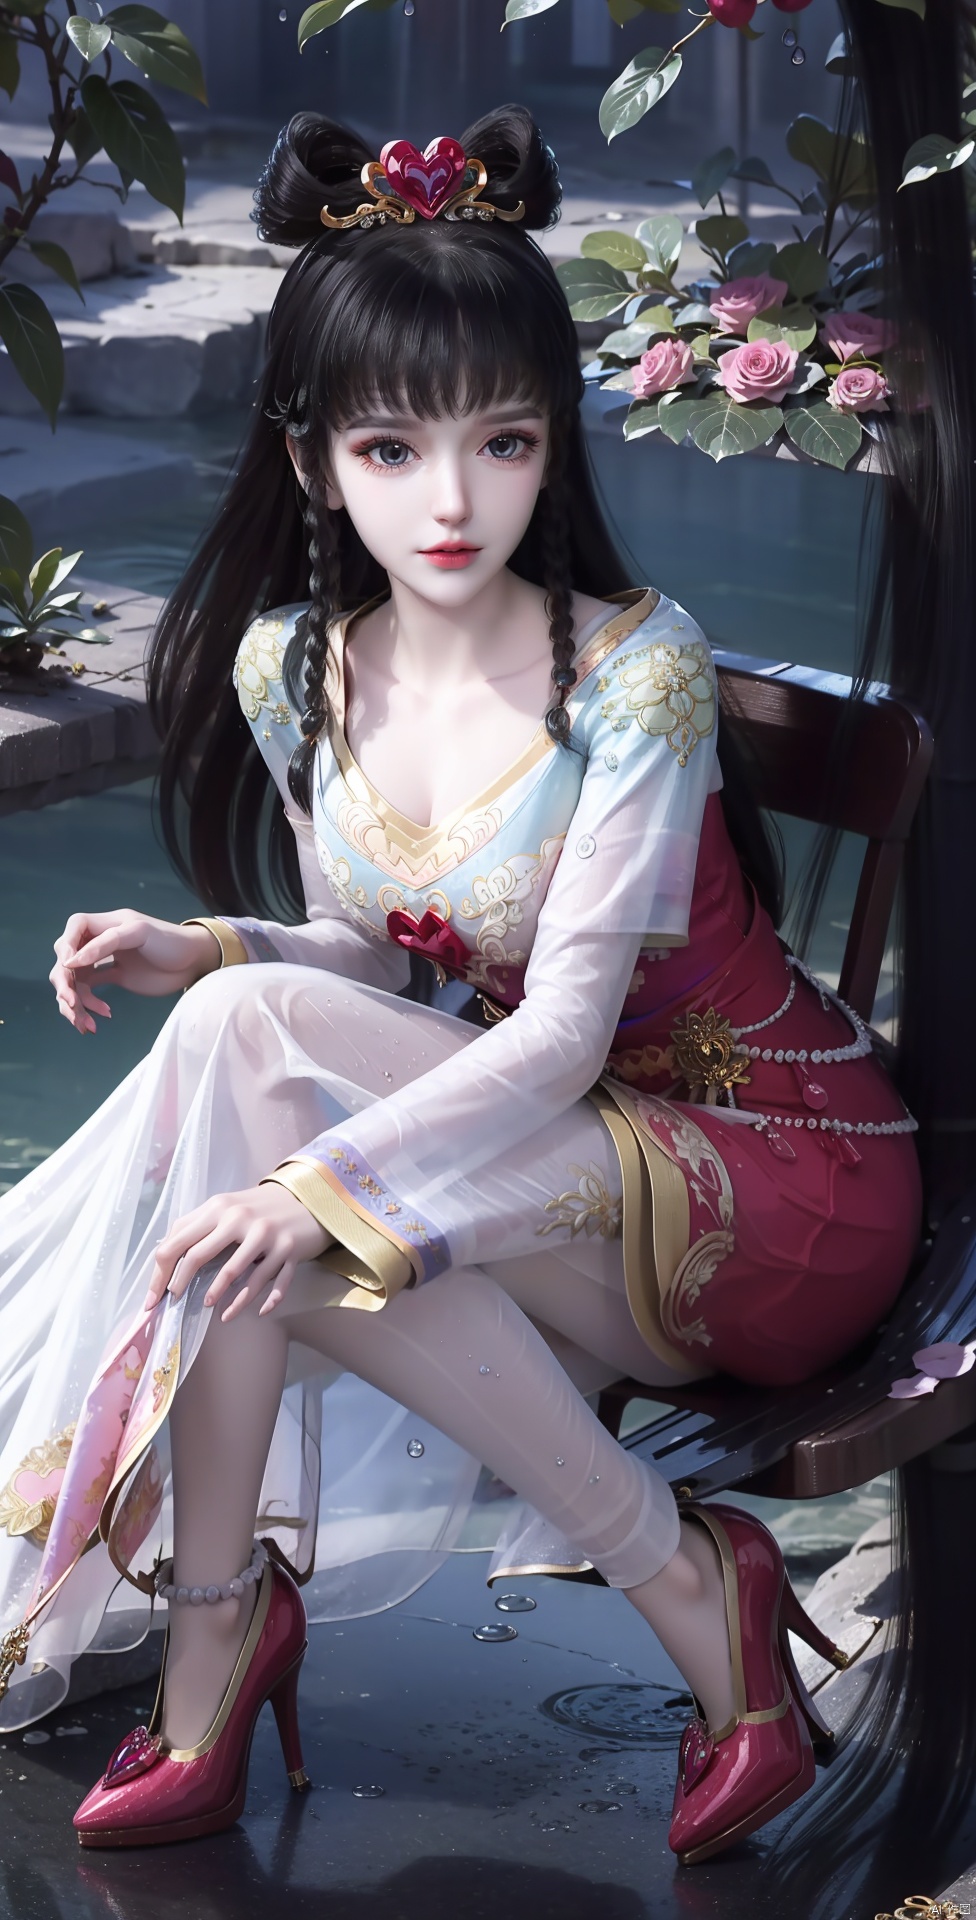  Black hair, long hair, HD picture quality, 1 girl, beautiful, beautiful, Milky Way, starry sky, very delicate and beautiful, very meticulous, unified, 8k, huge file size, Super Detail, High Charming Smile, Long Hair, Conservative Conservative Skirt, Skirt, Delicate Flower Headgear, Sit, Skirt, Princess Skirt, Swing, the highest picture quality, exquisite CG, sitting on a swing surrounded by flowers and vines, water drops in her hair, beautiful goddess, sparkling starlight, close-up, exquisite face, delicate lips, delicate eyes, delicate nose, dreamy, pink butterflies, sparkling water, sparkling pink crystal, sparkling lake against the background, rose petals falling, dress decorated with sparkling diamond pearls, high heels, long legs, very fine resolution,